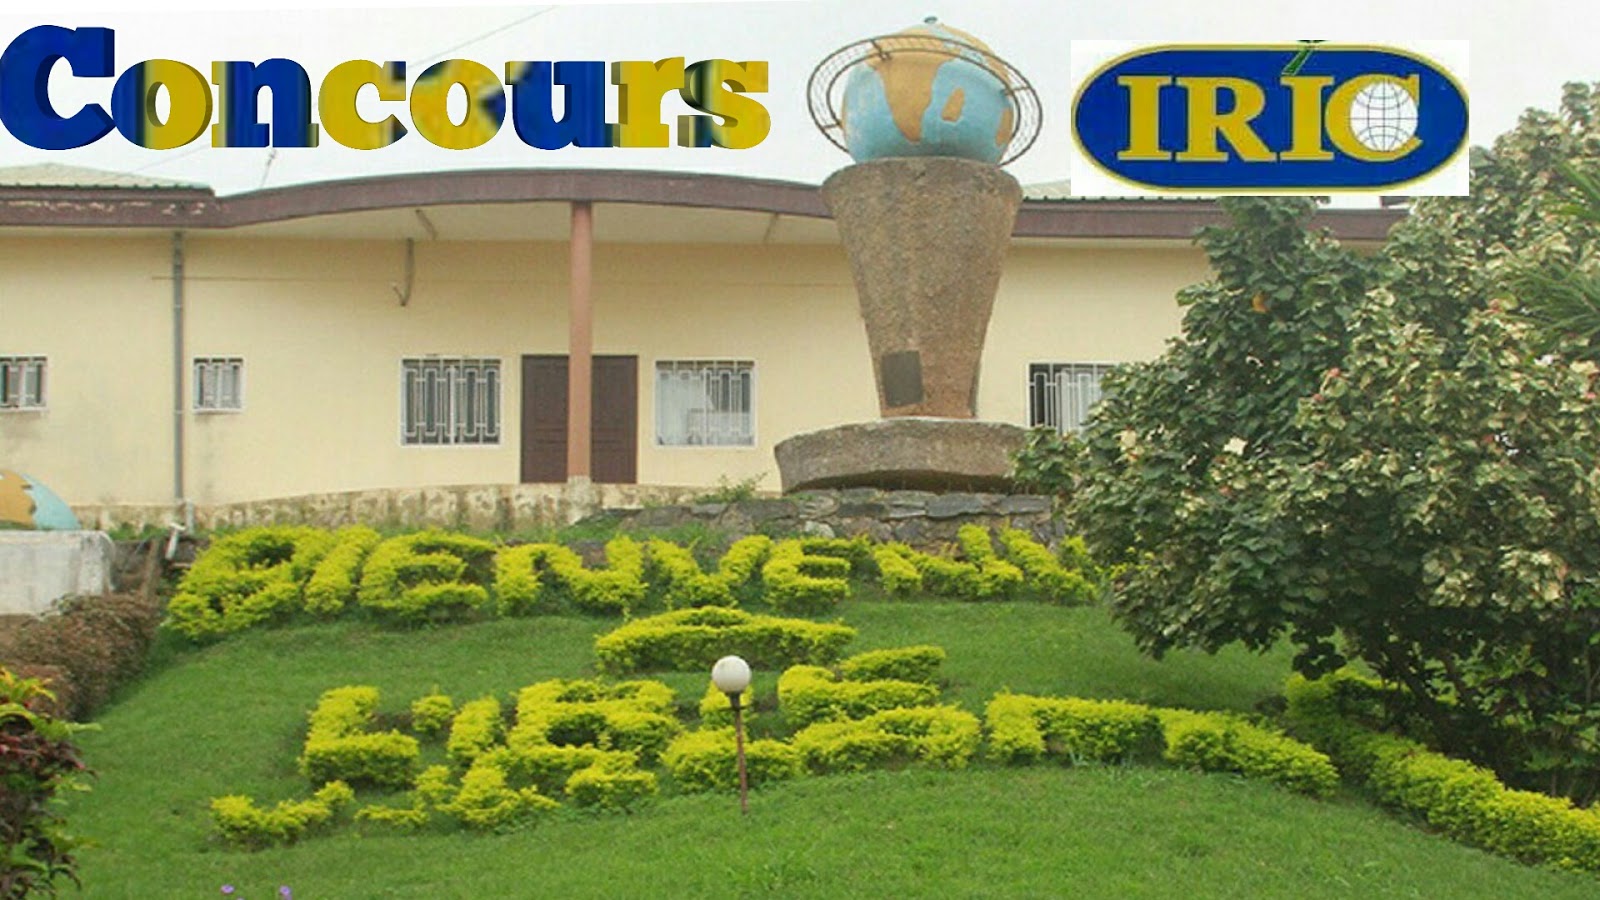 IRIC Concour: Master of International Cooperation, Humanitarian Action and sustainable Development